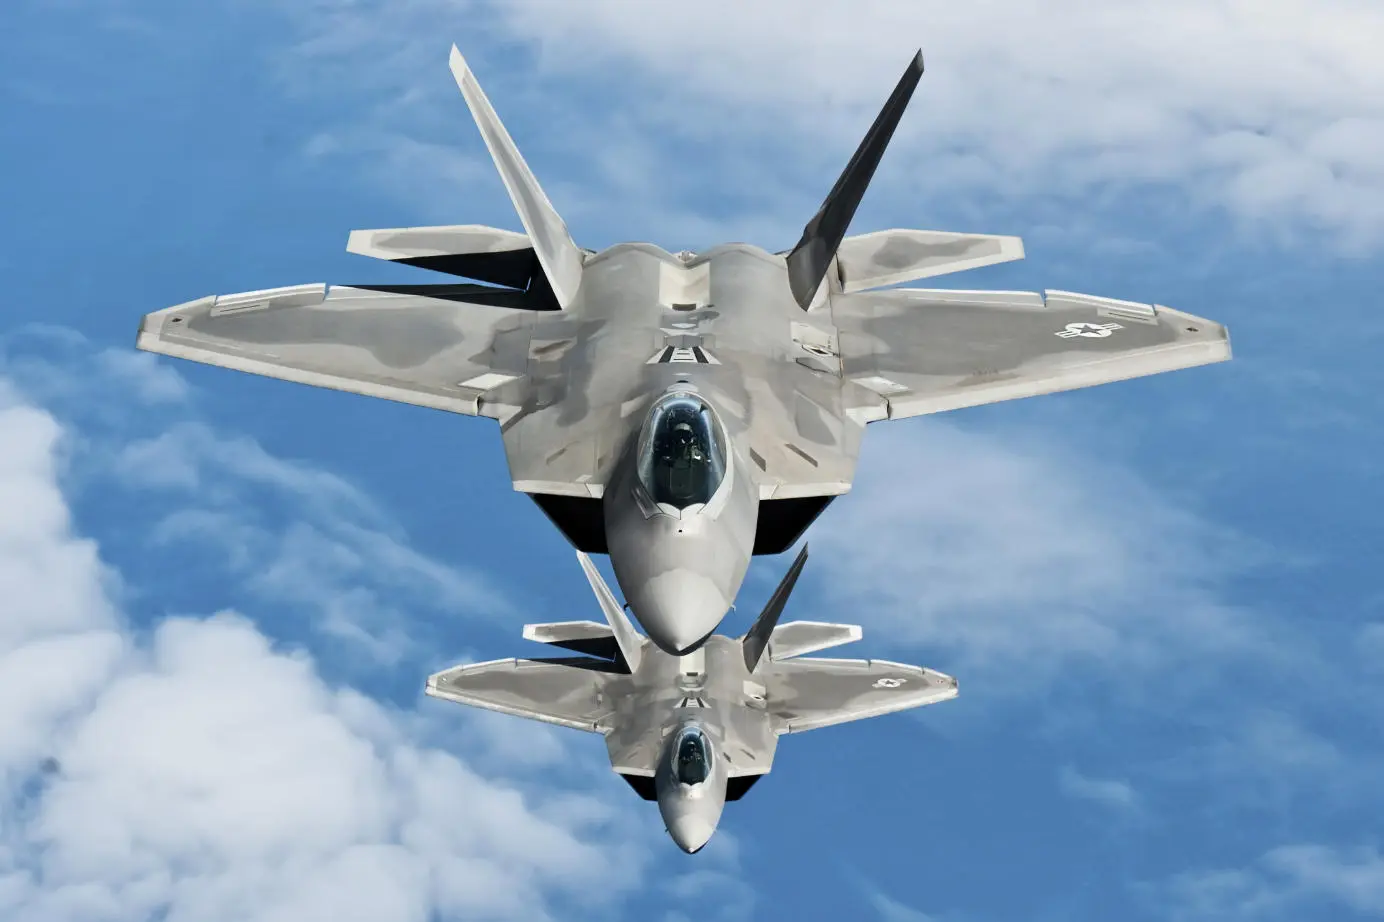 High costs meant that only 195 F-22 Raptors were built